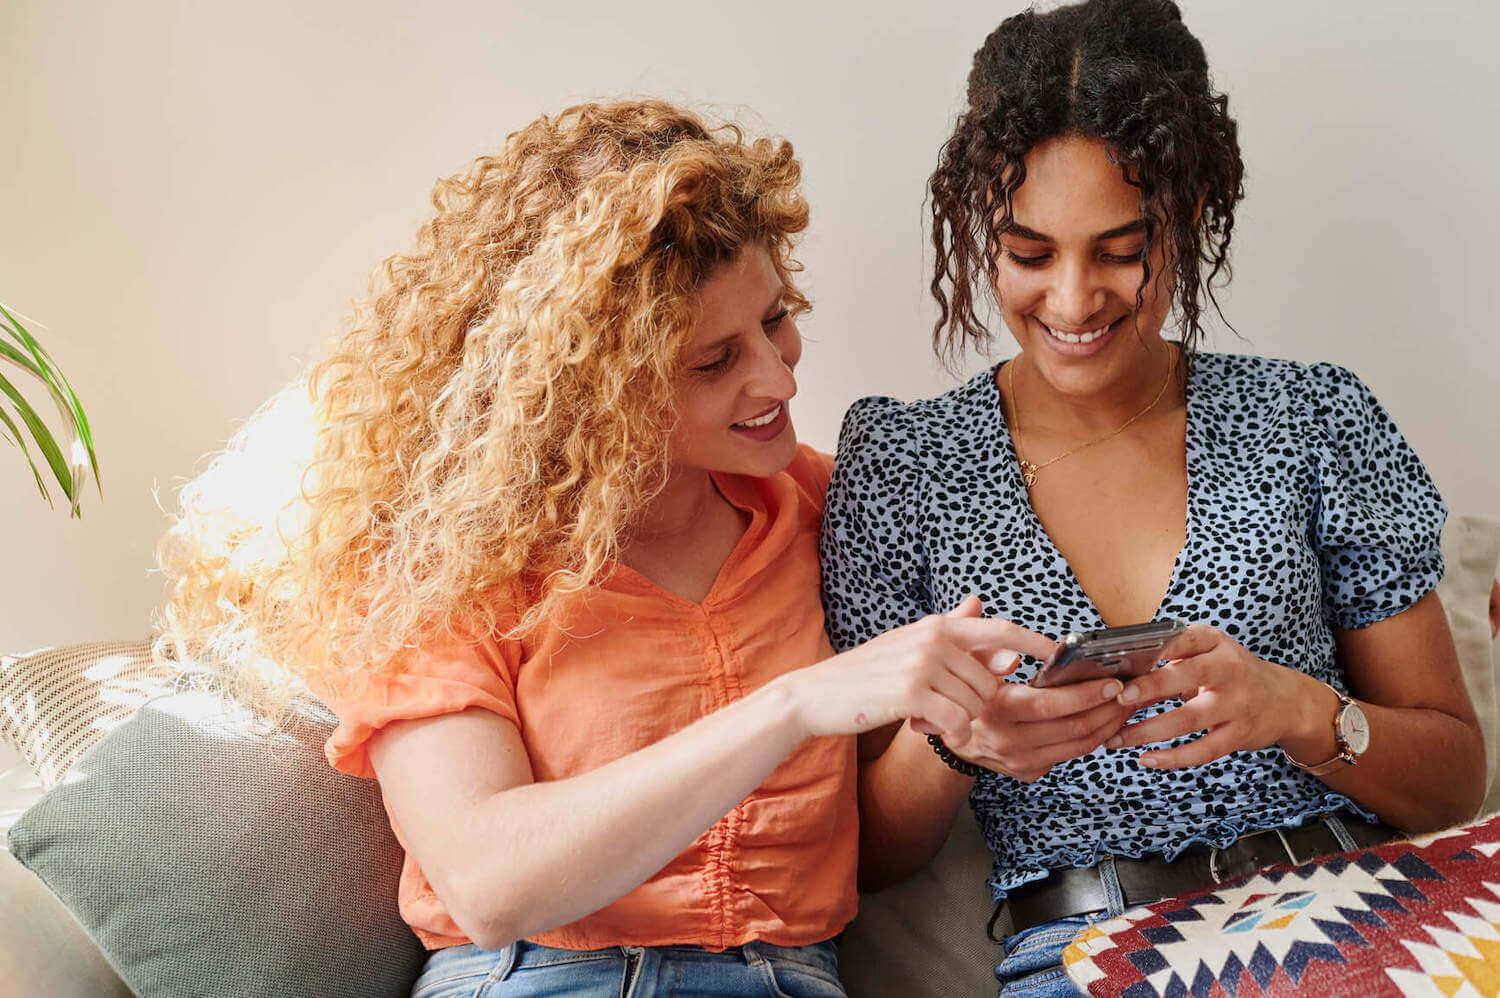 Two smiling women point and look at a smartphone together